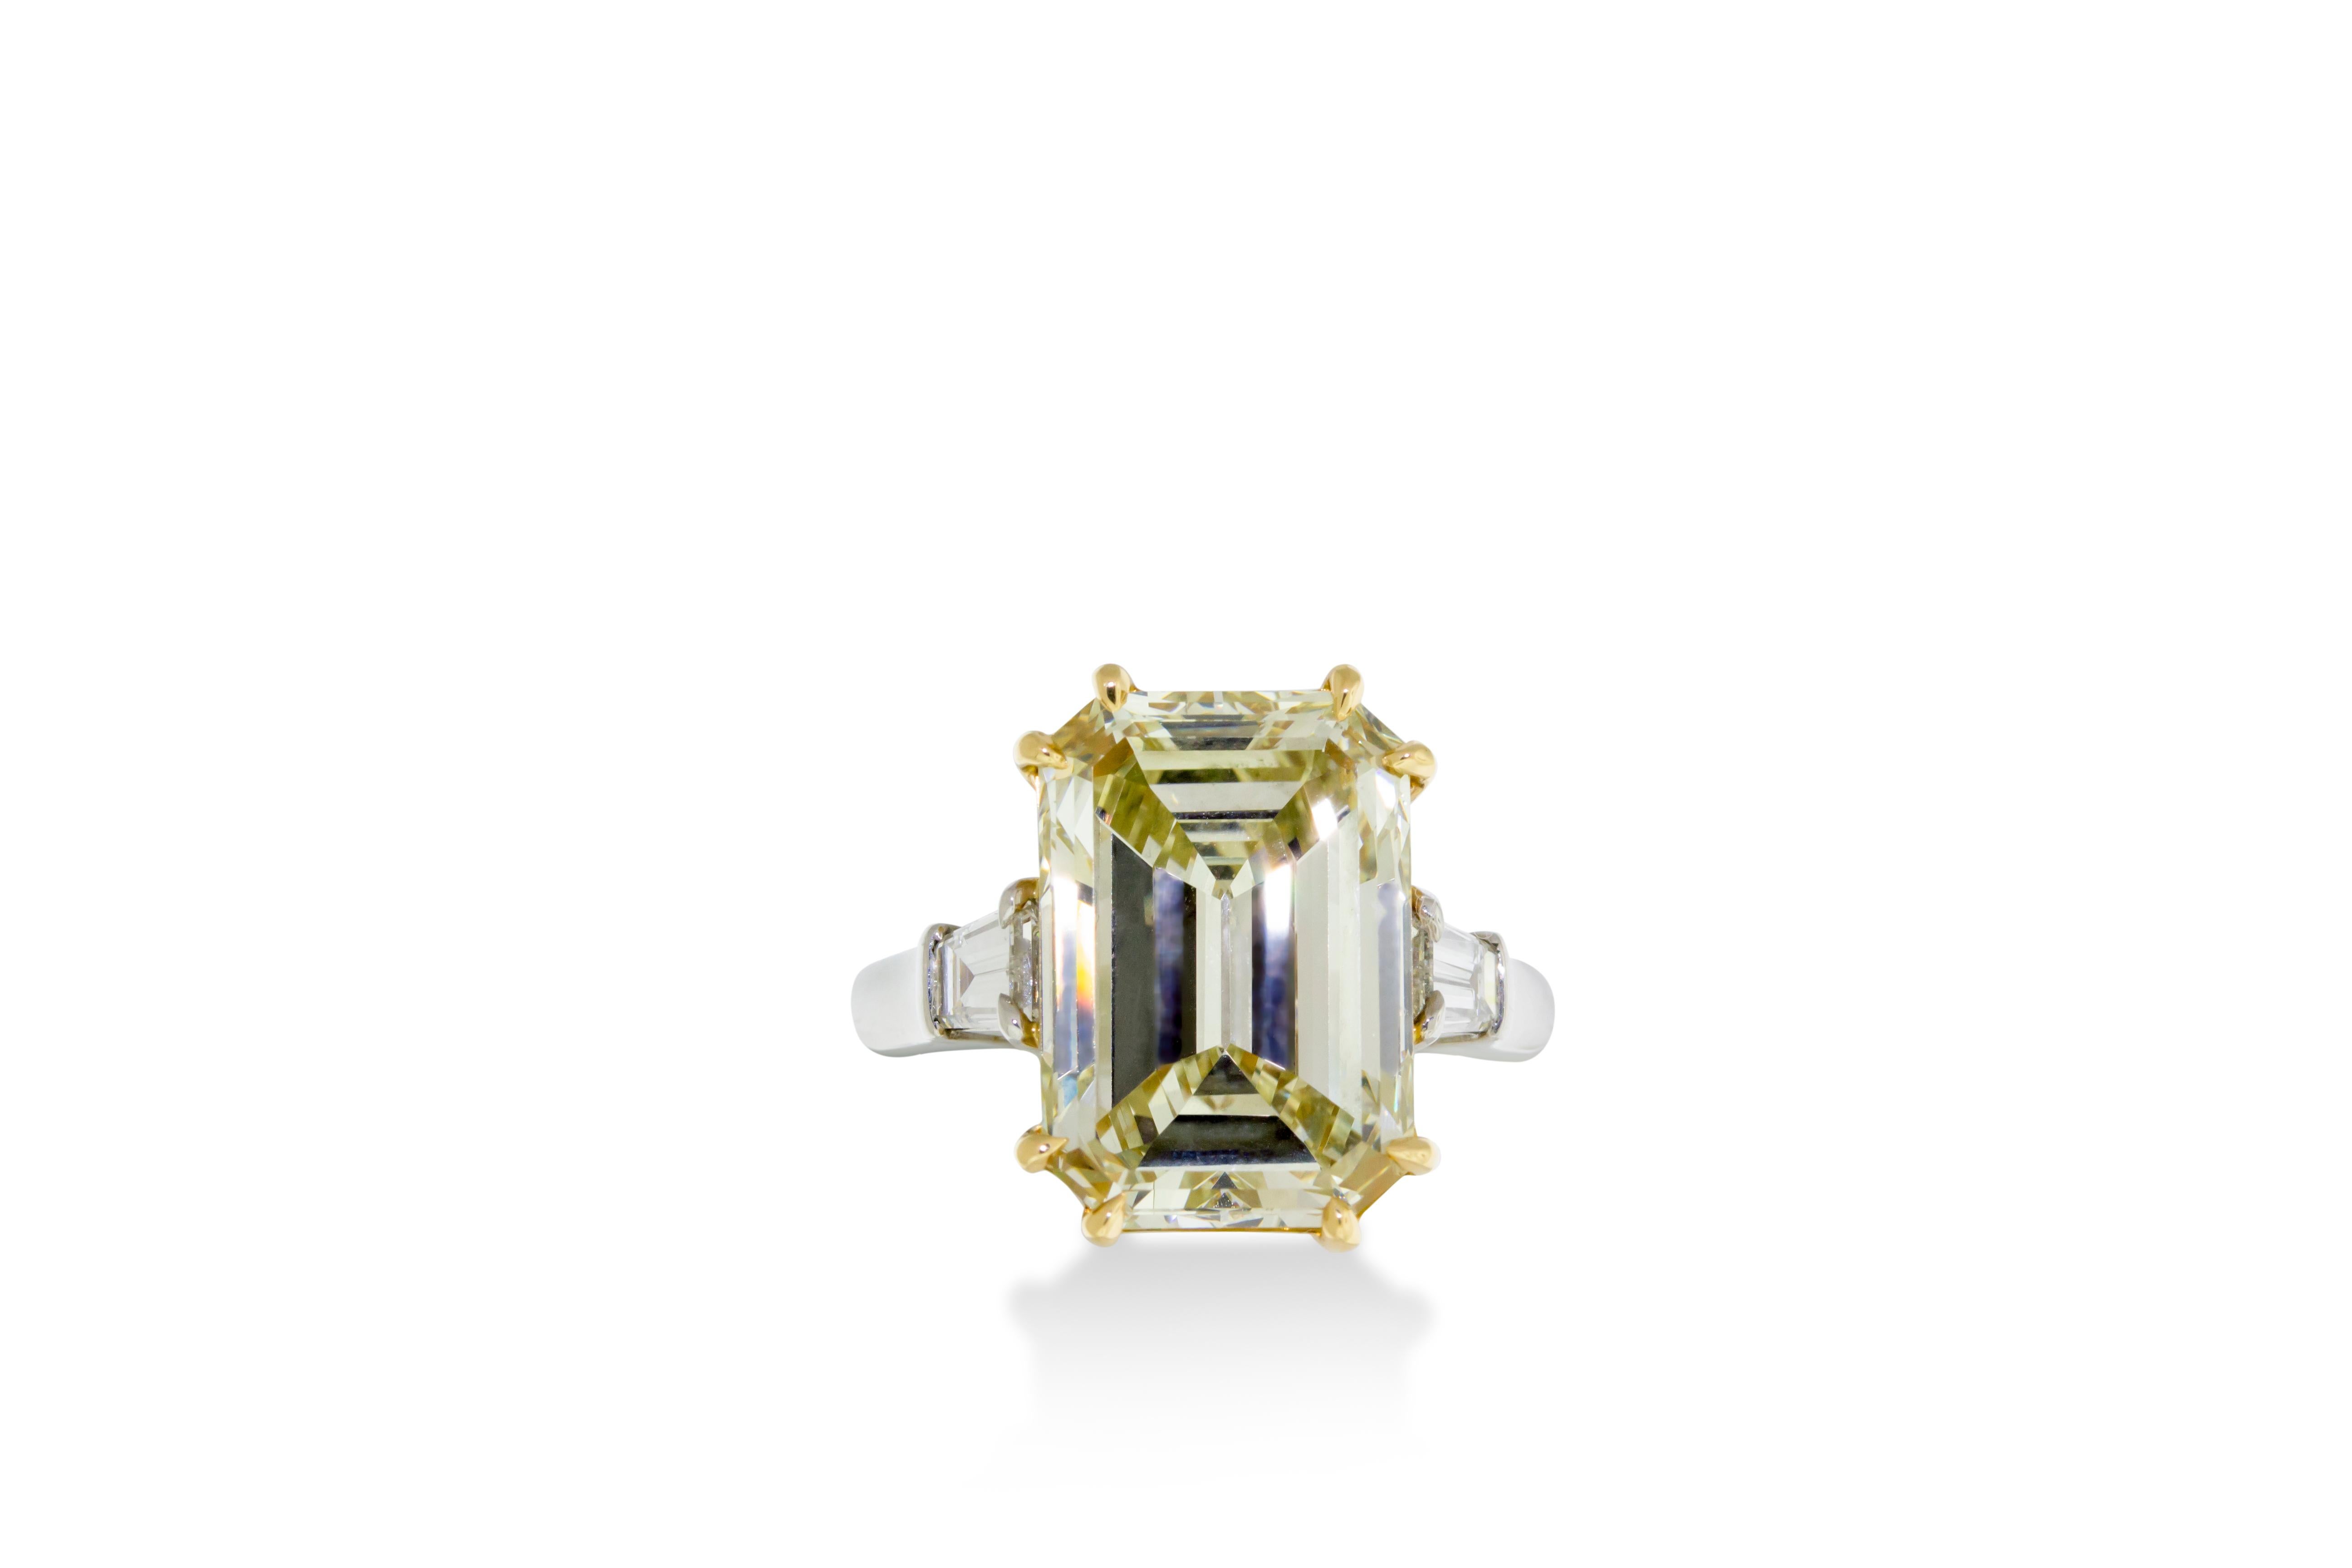 A 7.52 VVS2 fancy light yellow emerald cut diamond flanked on either side by a tapered baguette cut diamond. Mounted in 18K yellow gold and platinum. GIA certified. Report No. 2165553057. Size 6.  

Resizing available upon request. 

Viewings